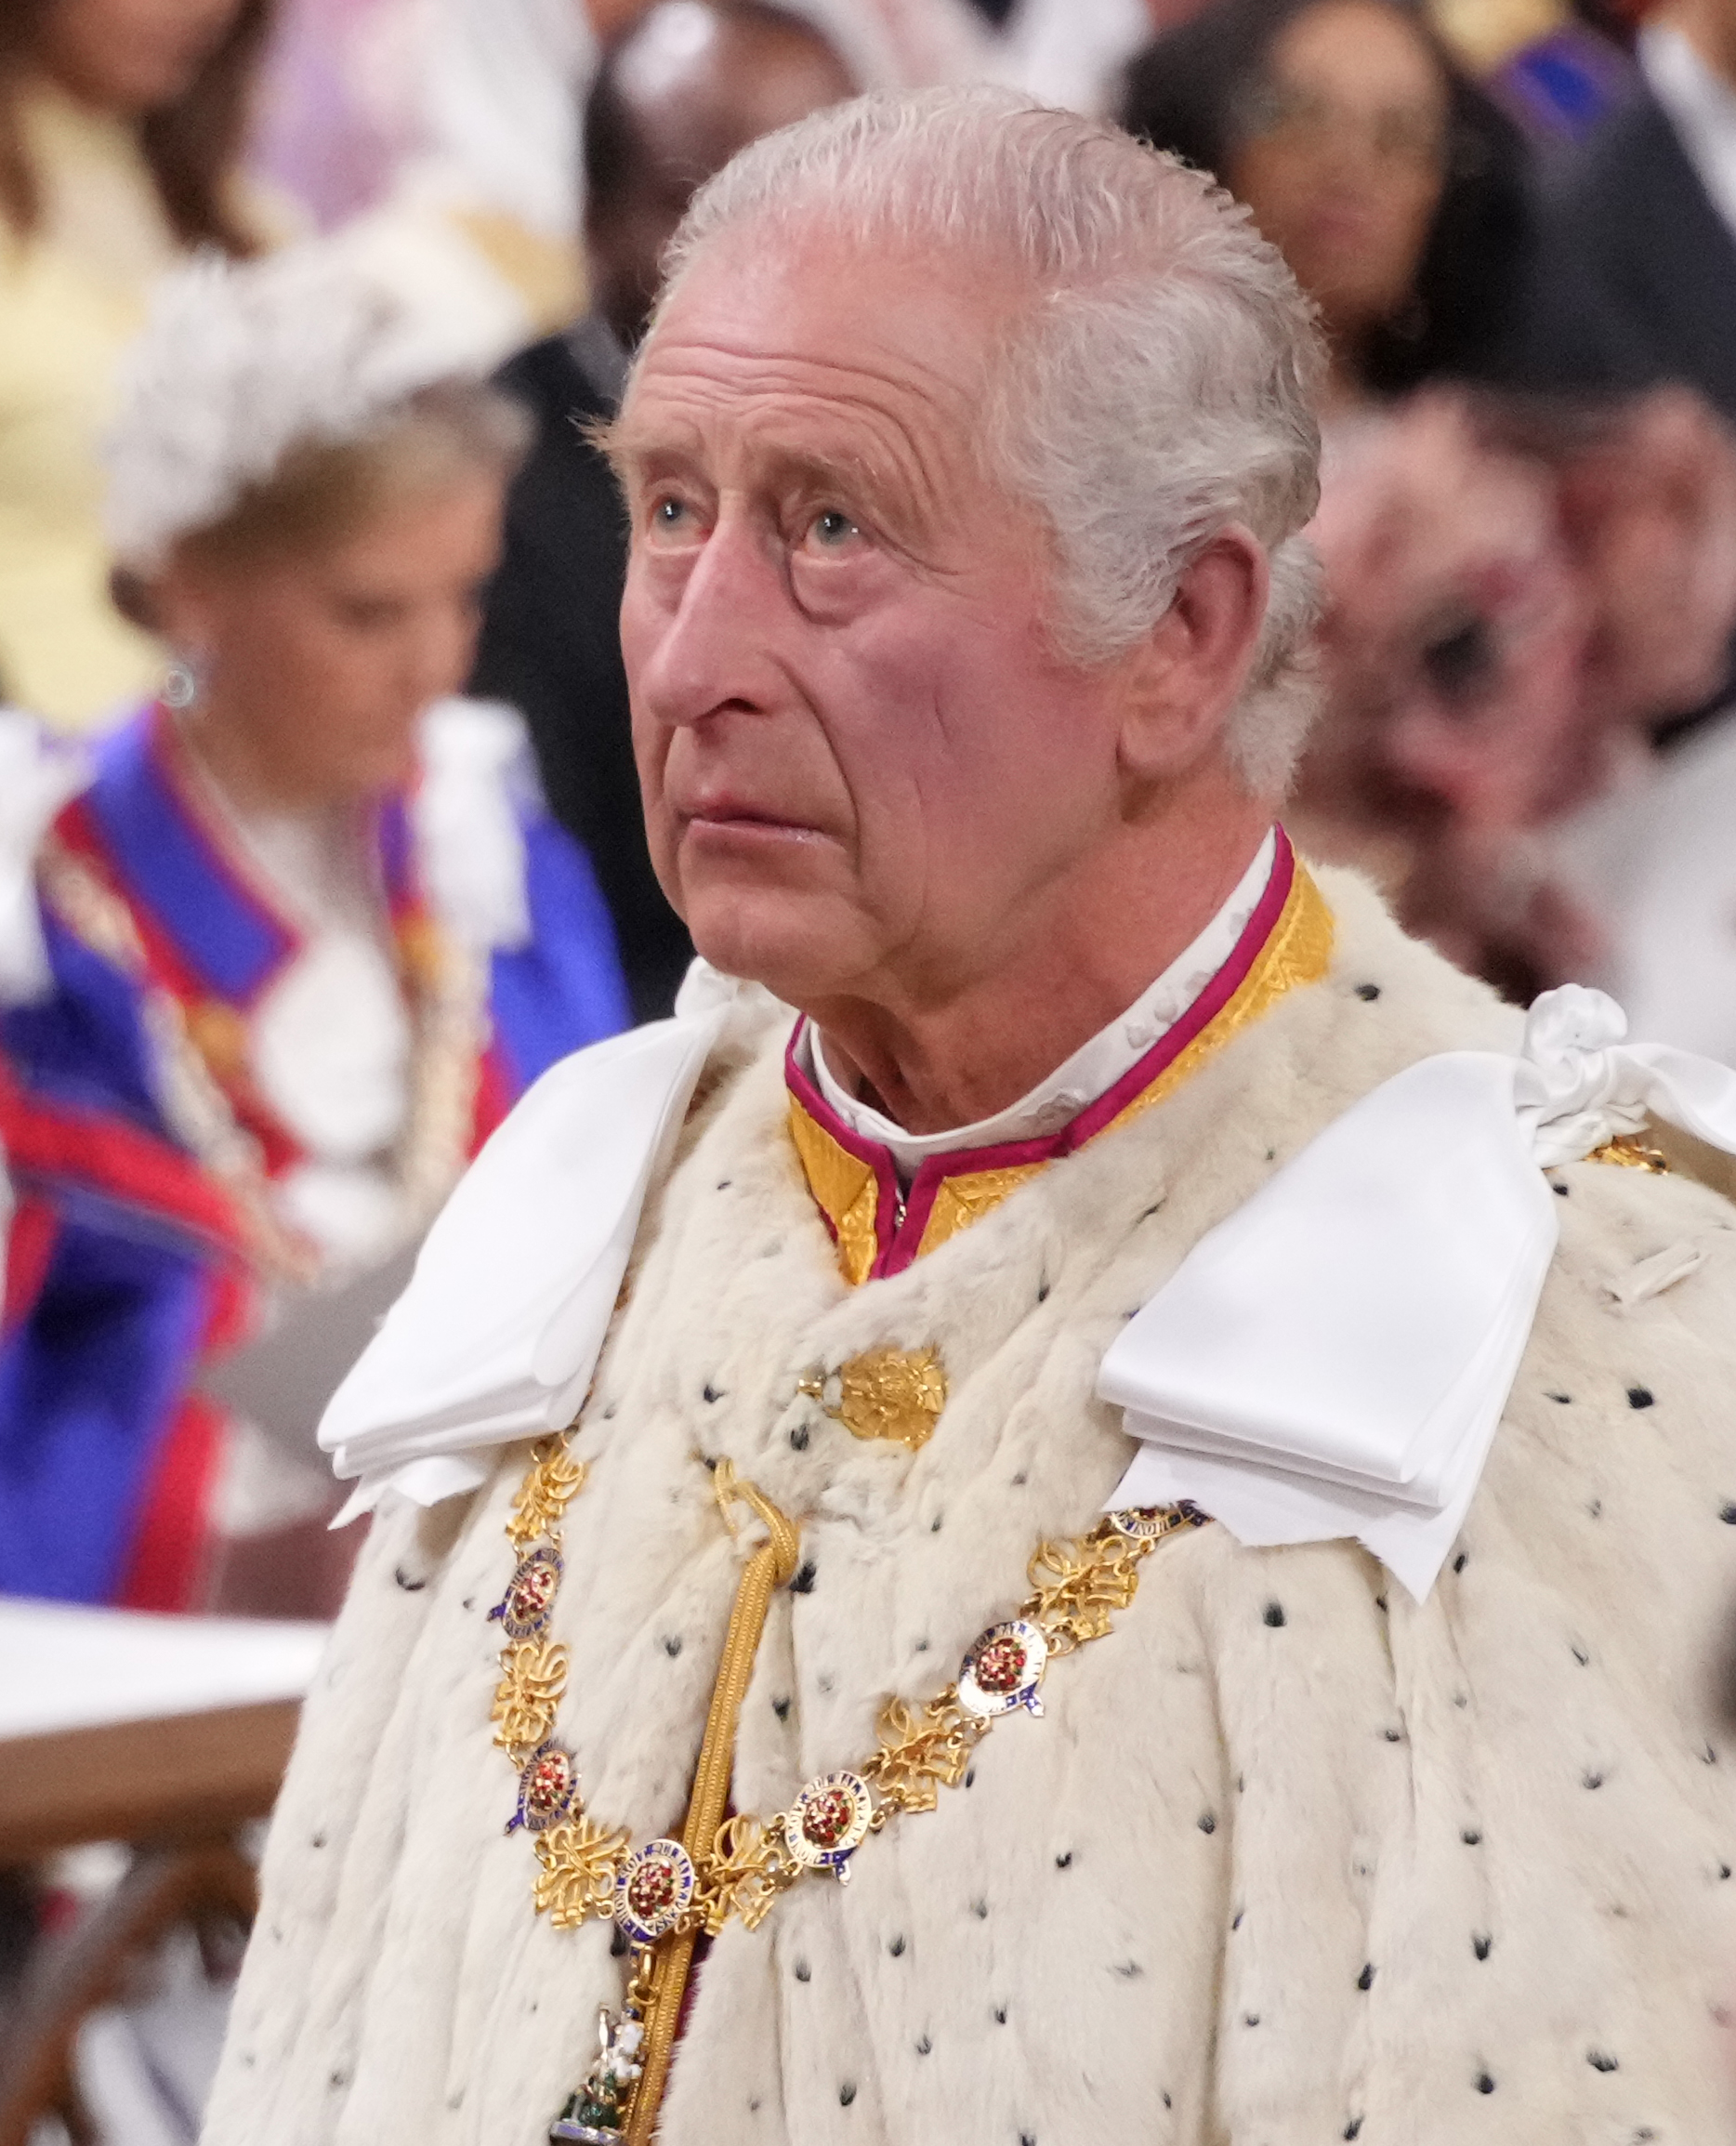 King Charles III during his and Queen Camilla's Coronation in London, England, on May 6, 2023. | Source: Getty Images